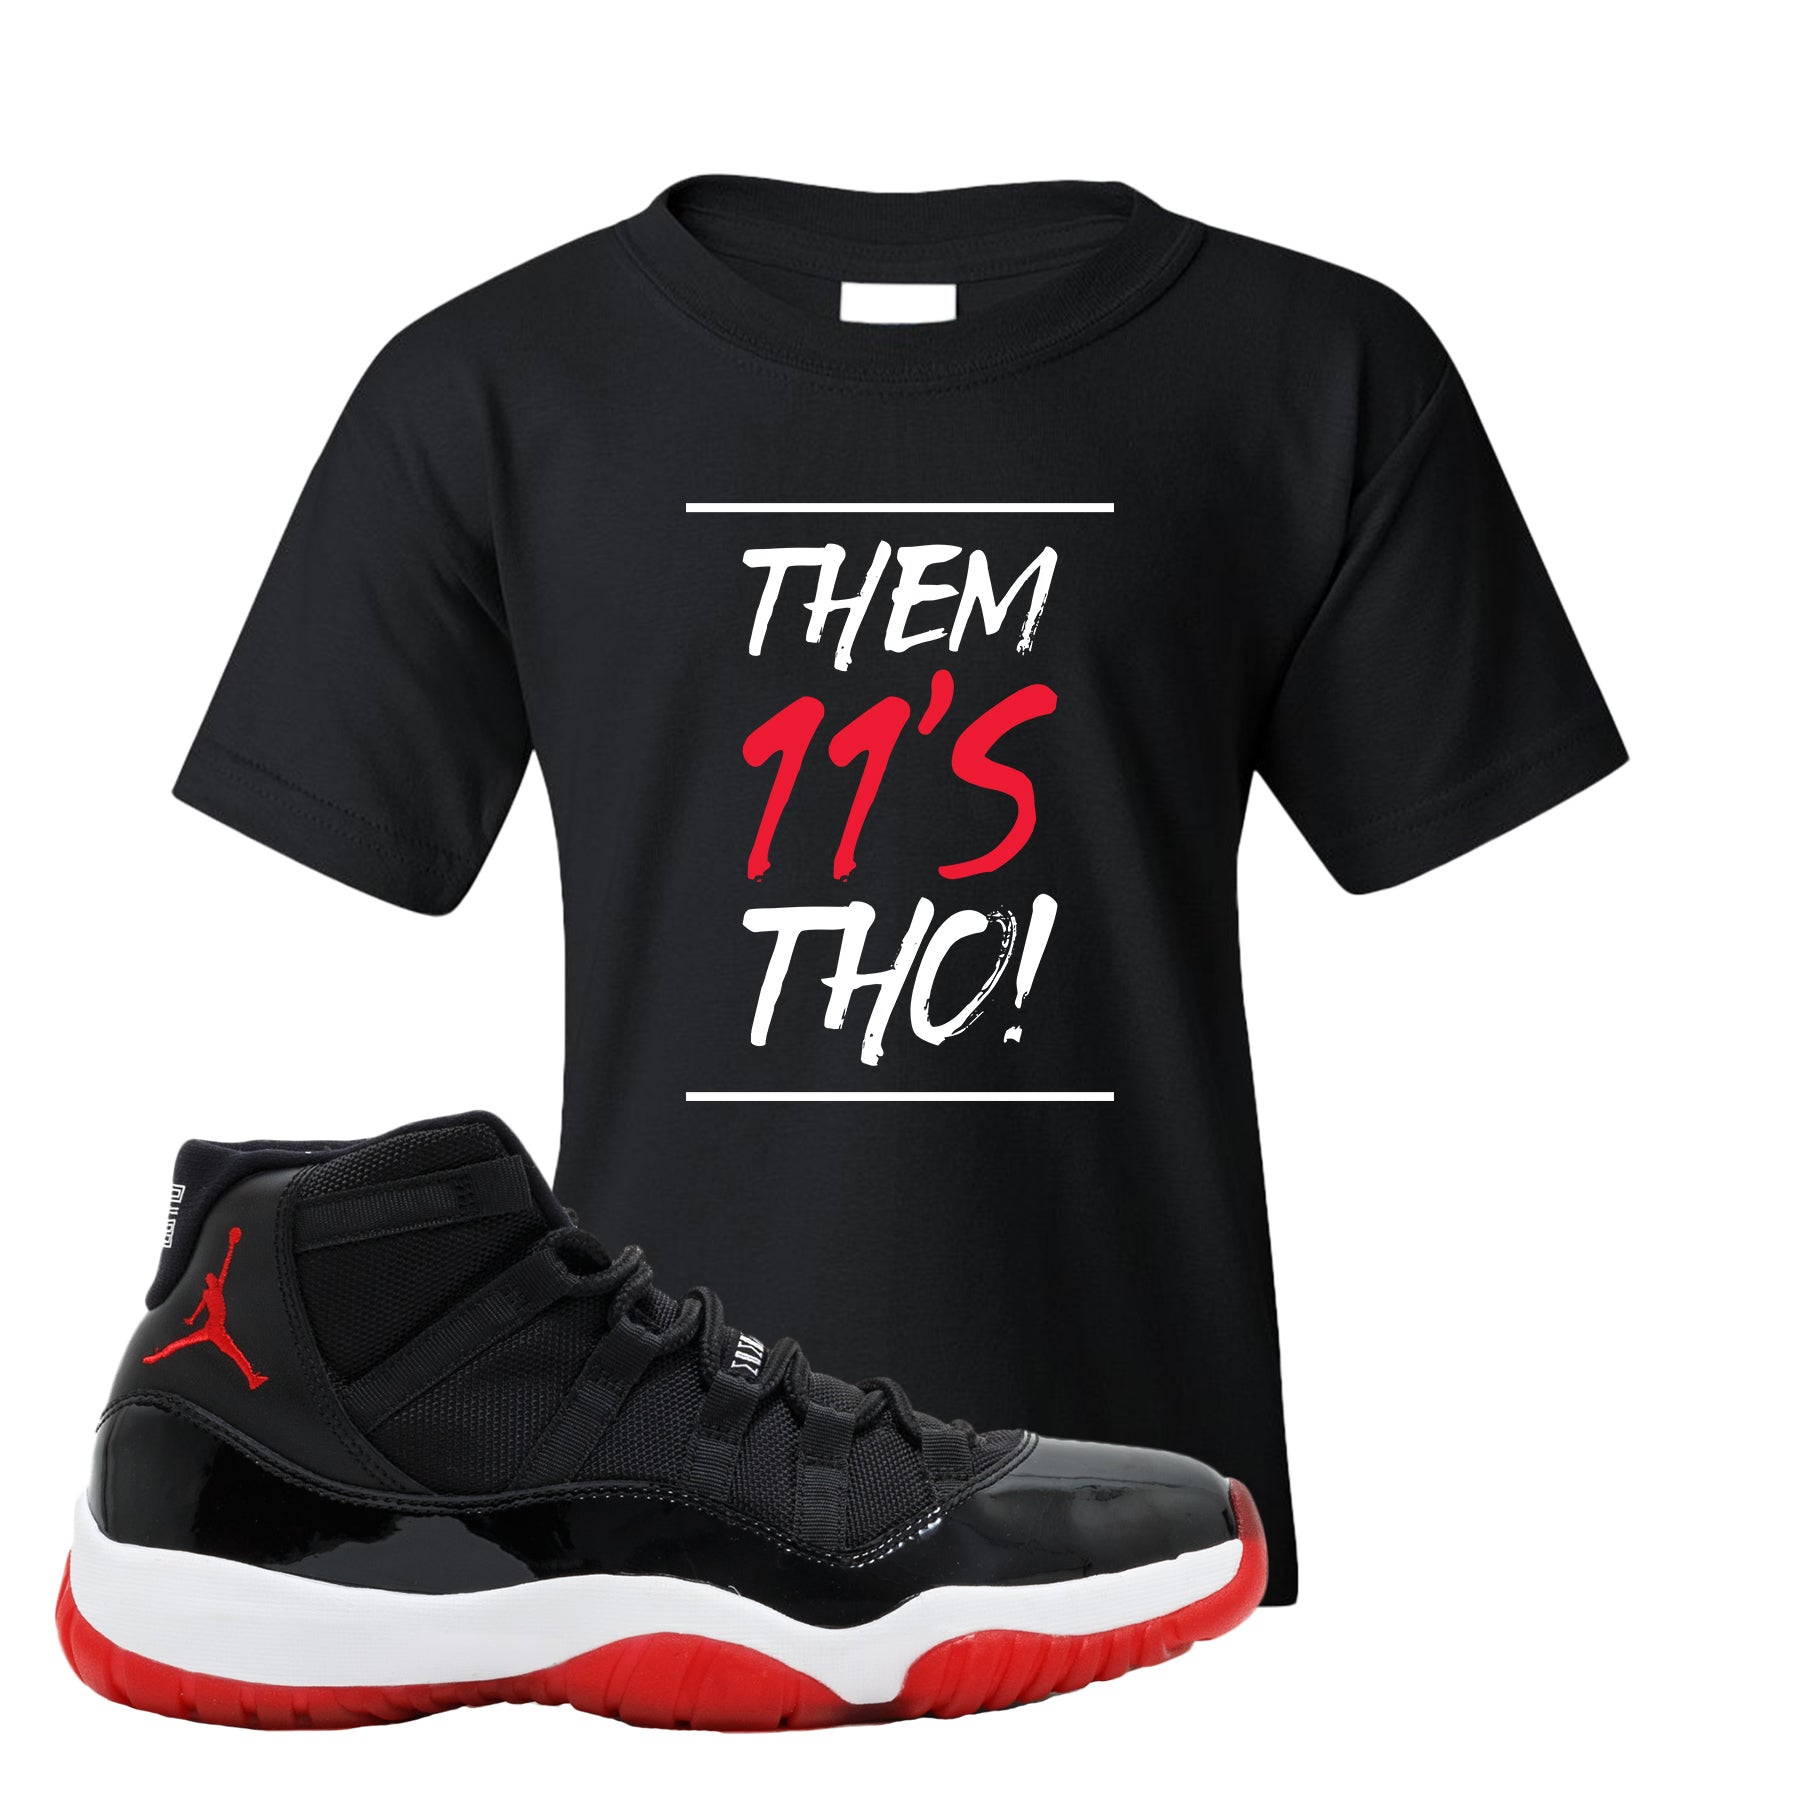 shirts to go with bred 11s